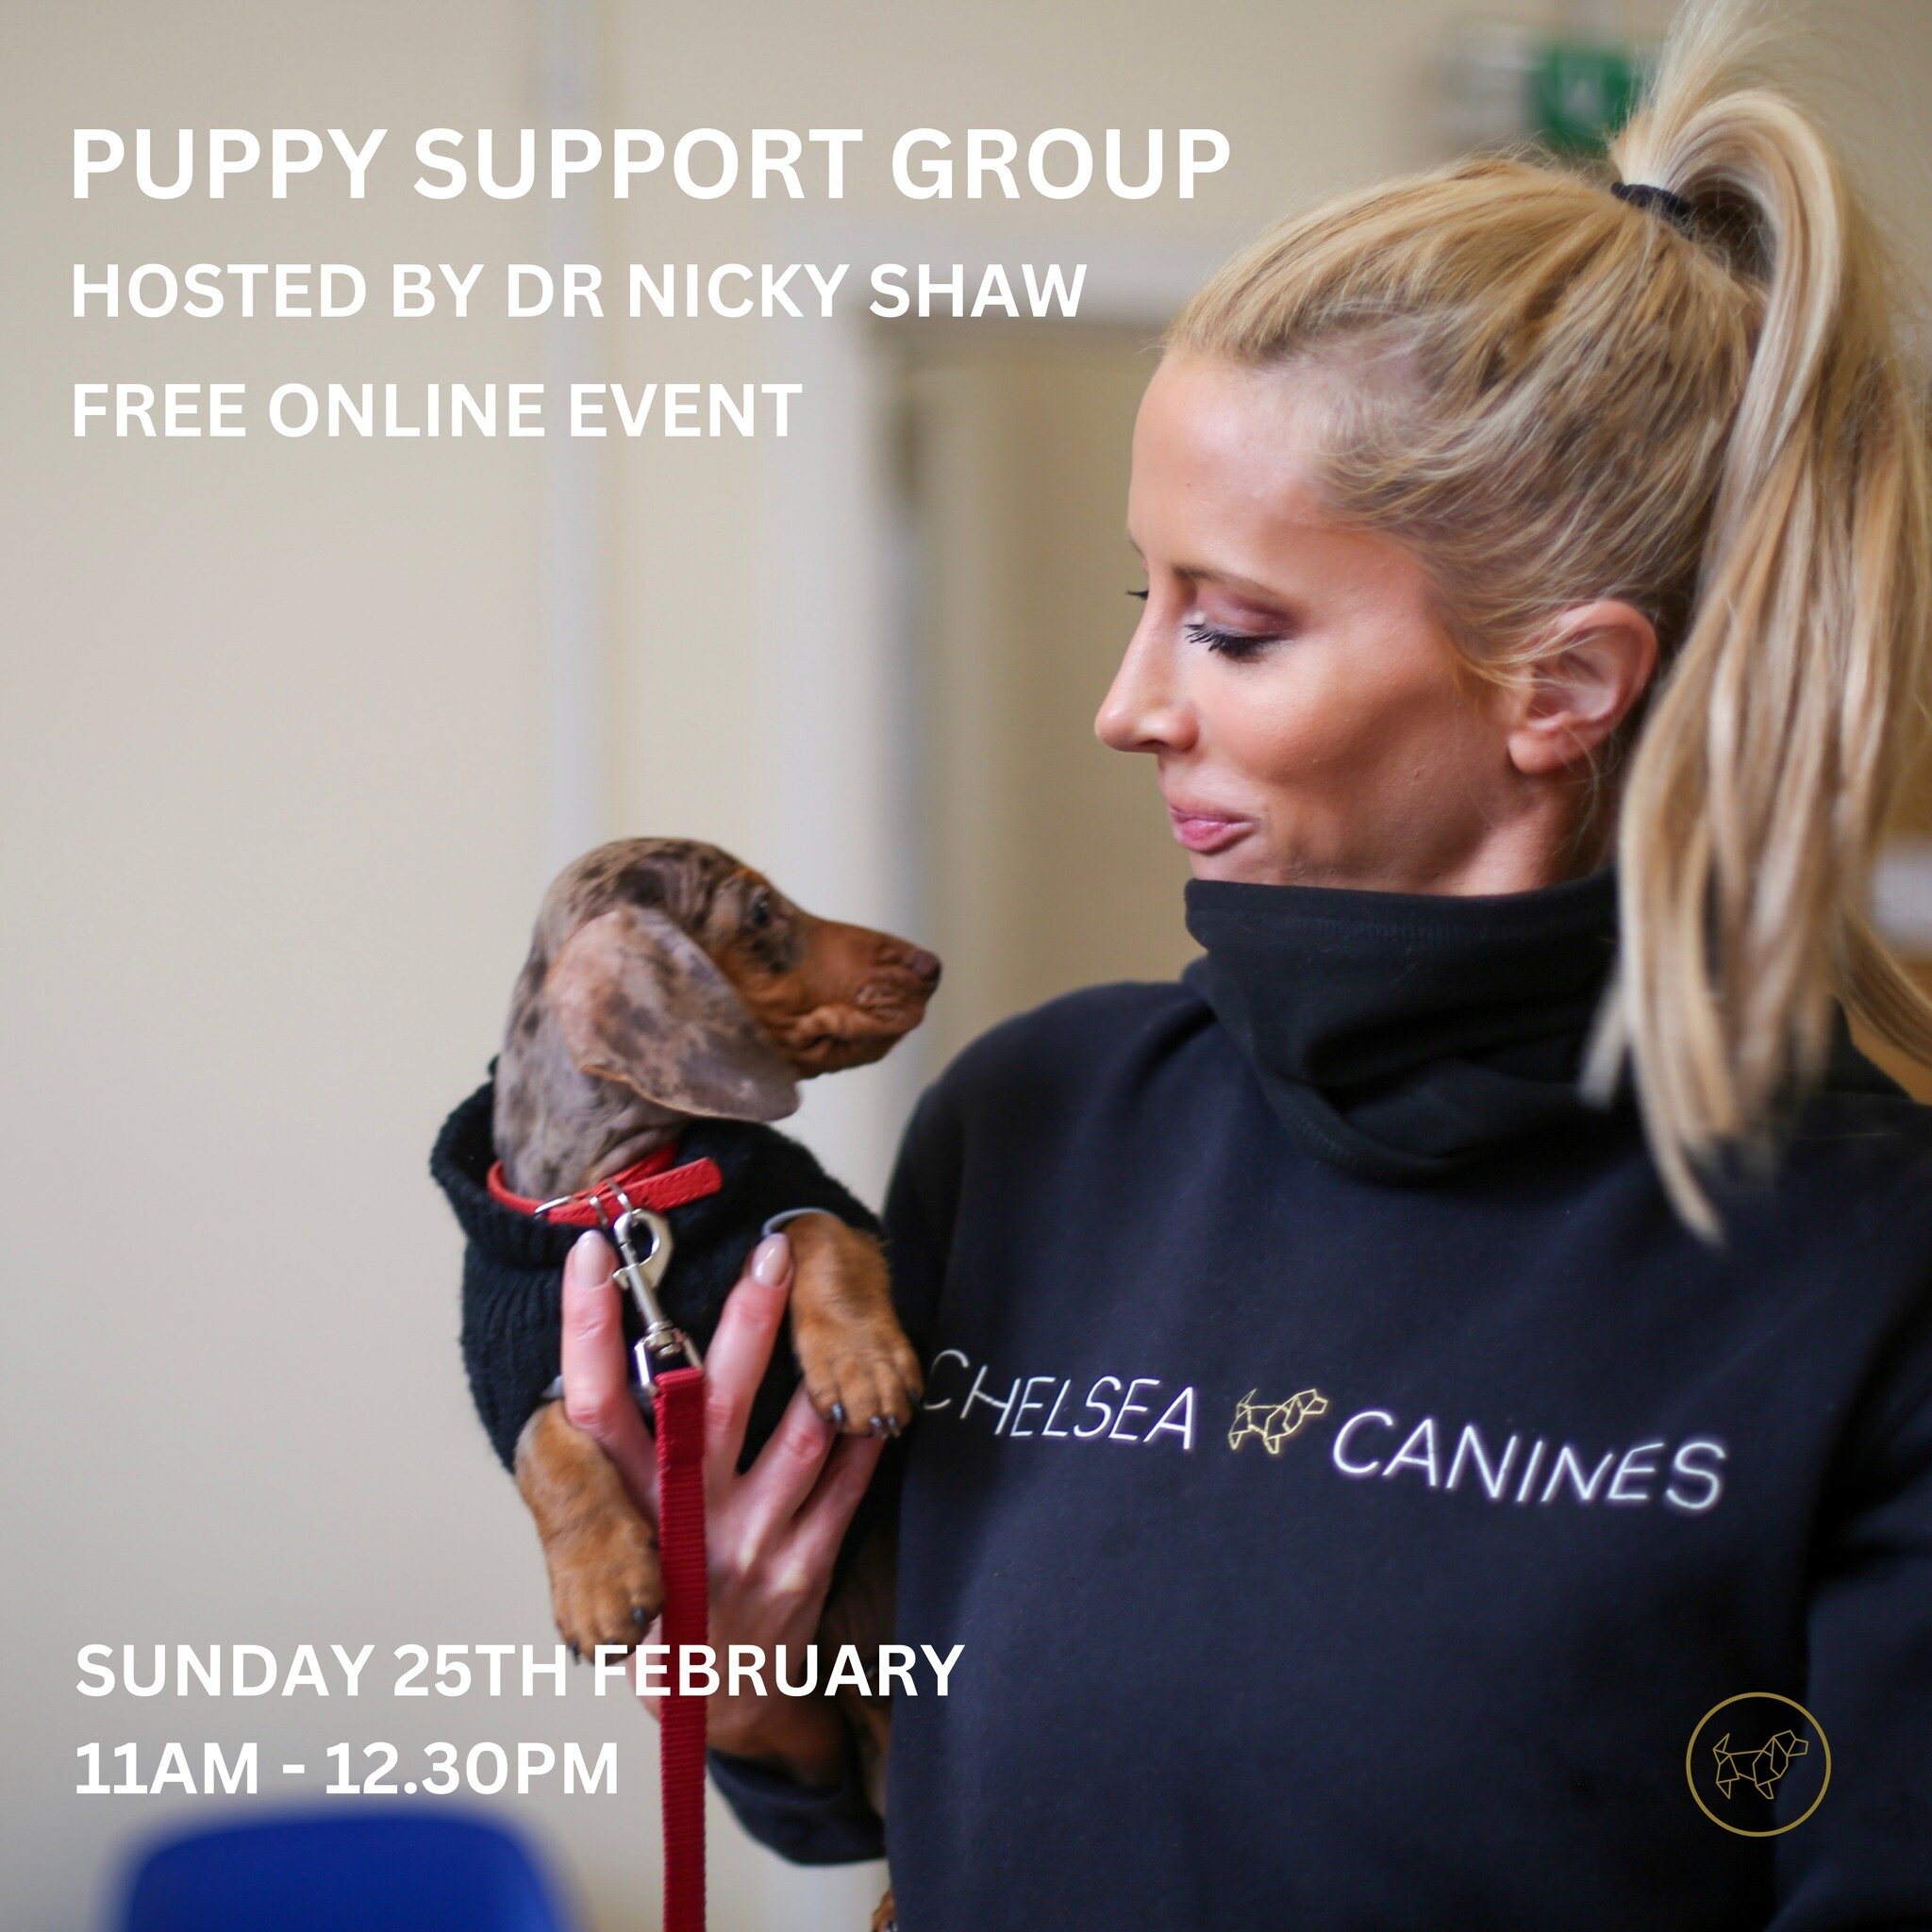 Calling all puppy parents! I will be hosting another online puppy support group via Zoom on Sunday 25th February from 11am-12.30pm.

Newbies, Chelsea Canines graduates and current school attendees are all welcome. Drop by for a friendly chat and ask 